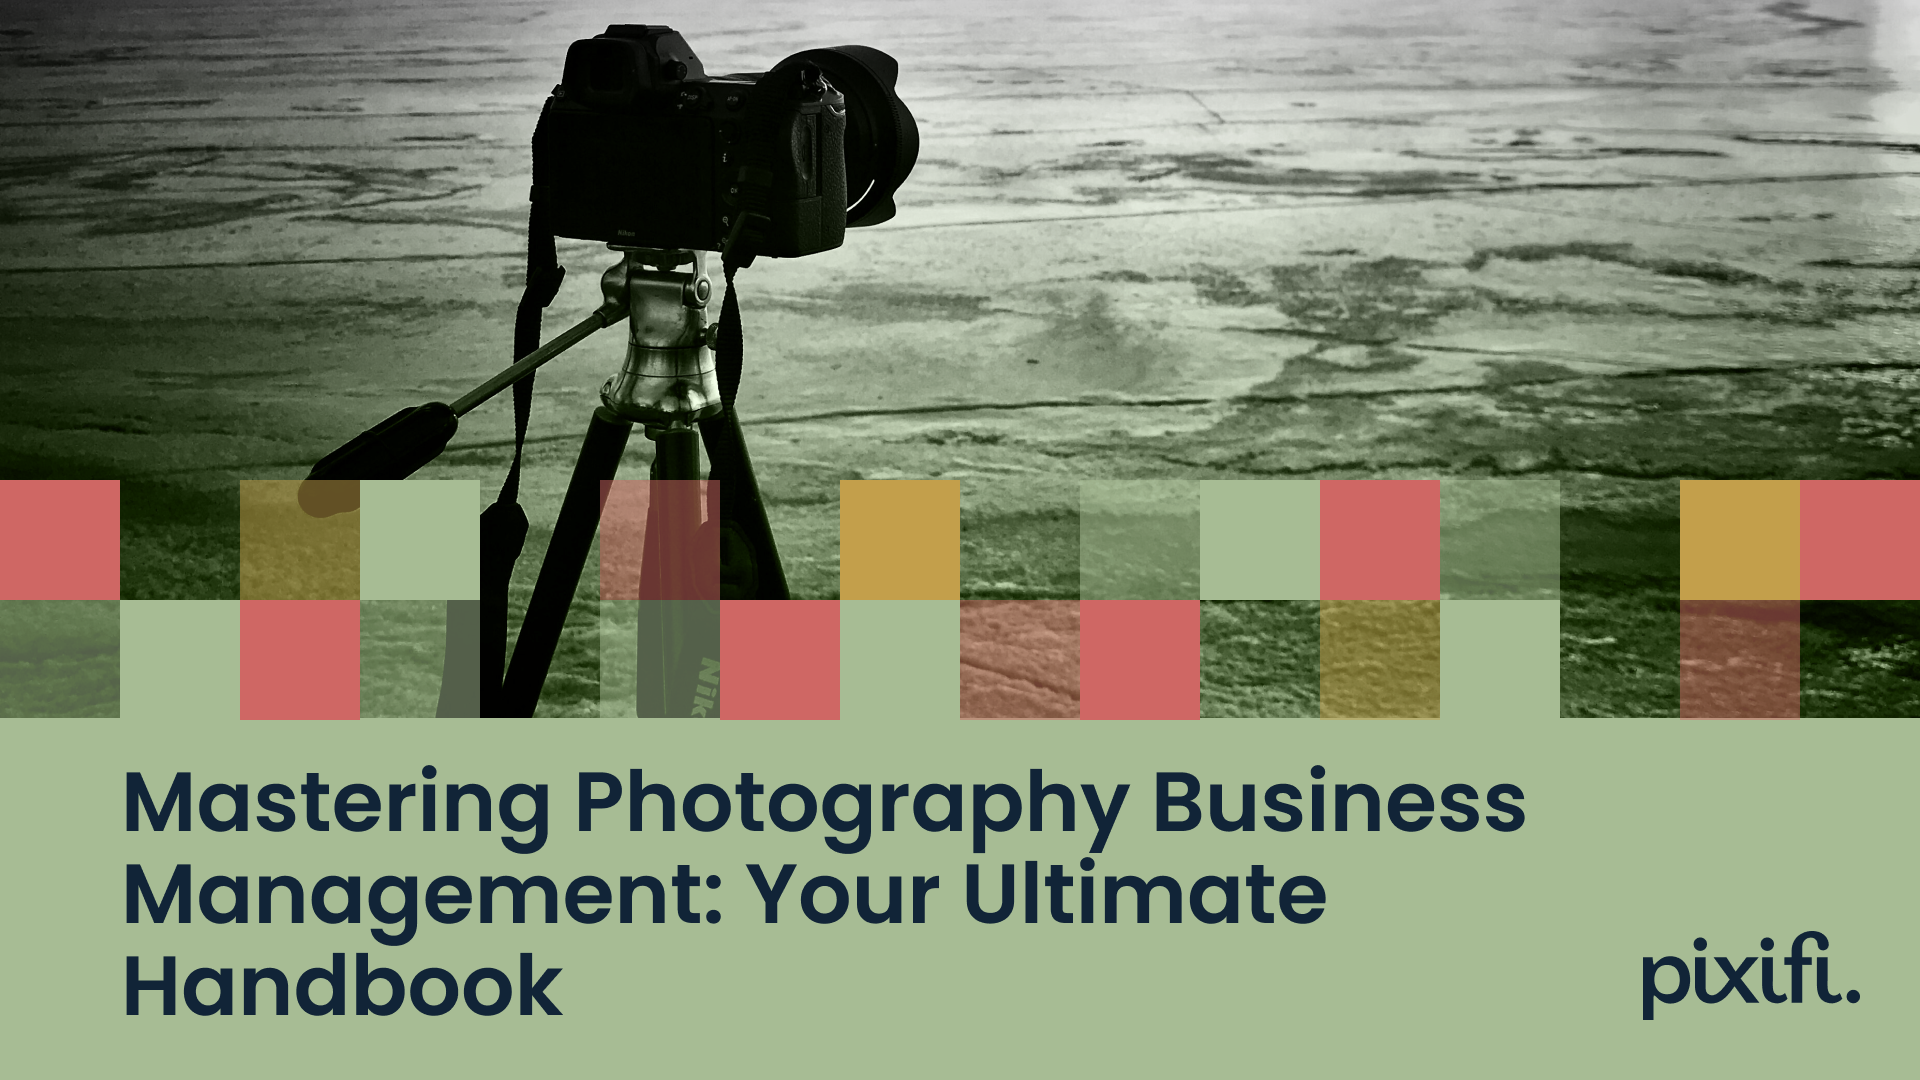 Mastering Photography Business Management: Your Ultimate Handbook